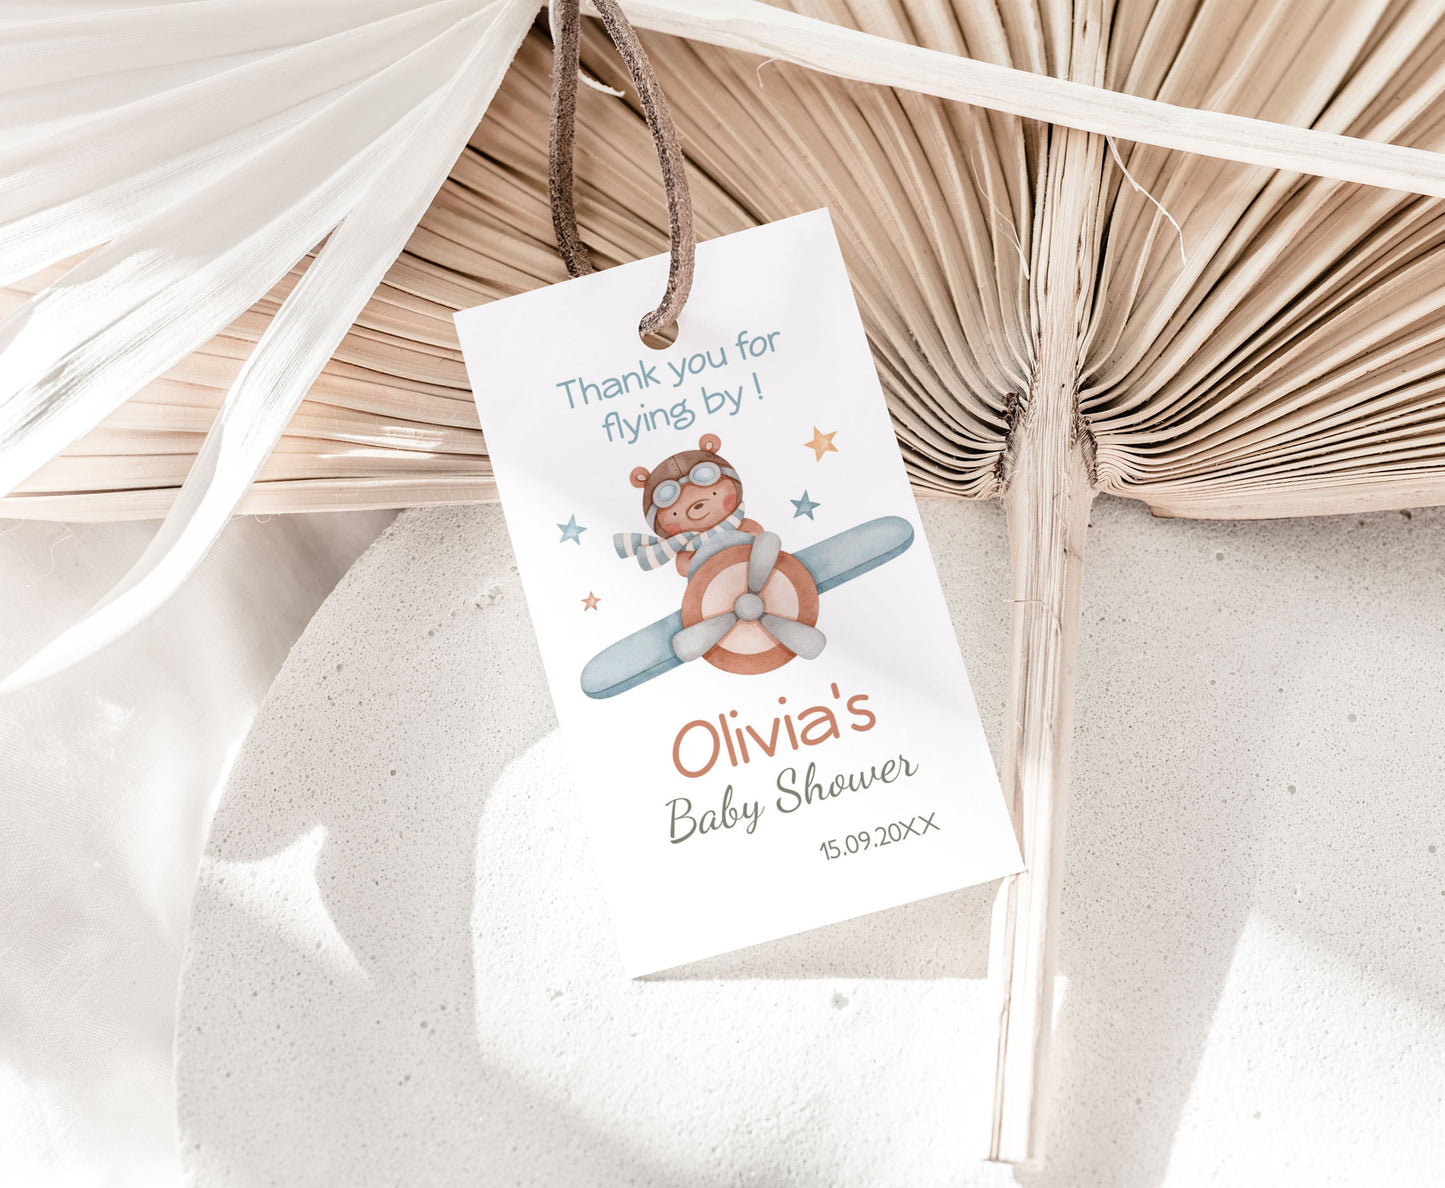 Aviator Thank You for flying byTags | Airplane Baby Shower Gift Tags - 76C